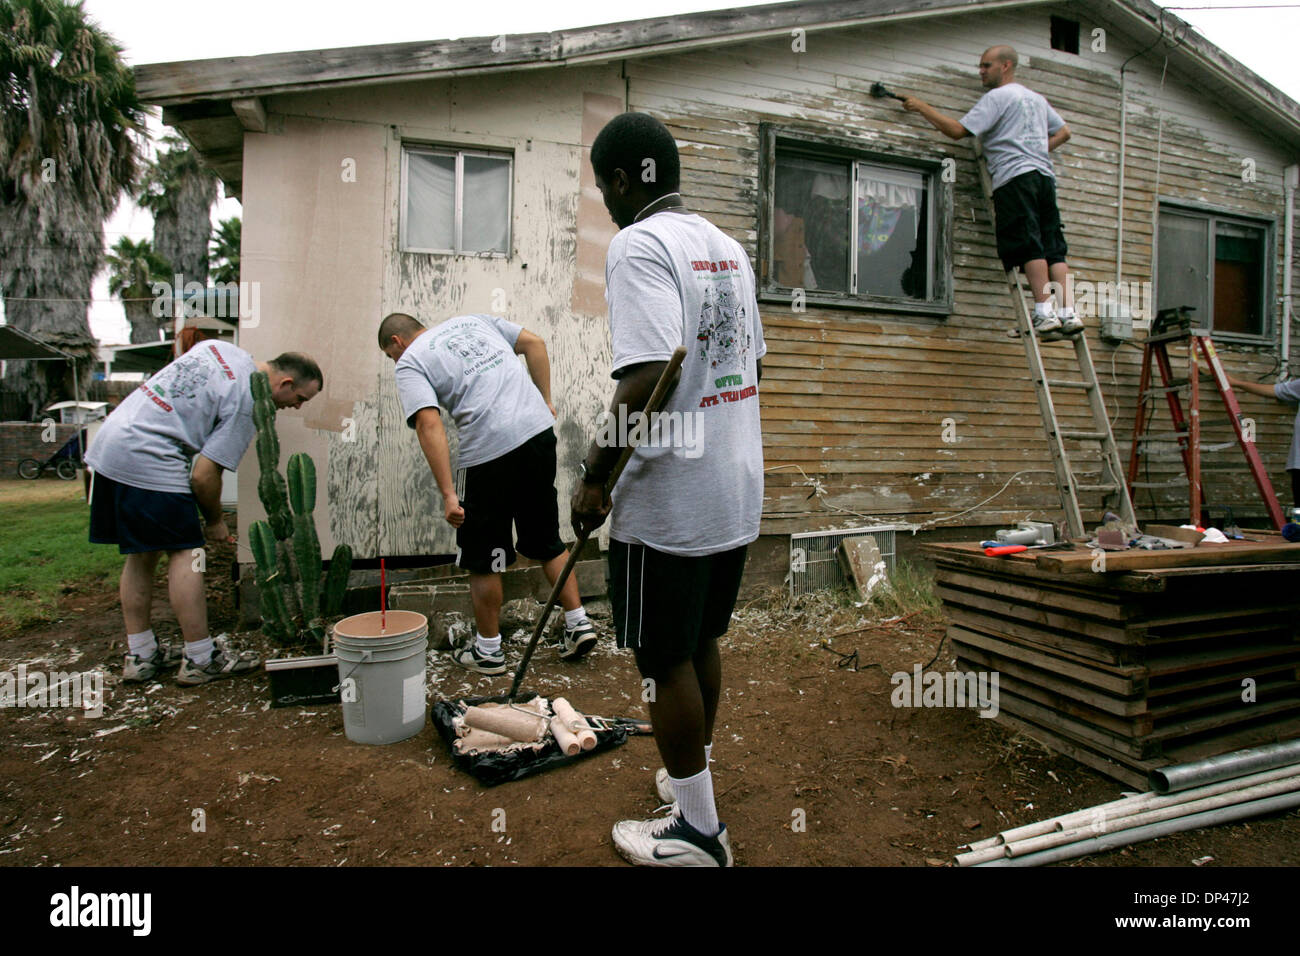 Jul 29, 2006; National City, CA, USA; Navy Fleet Anti-Submarine Warfare volunteers GREG BINGMAN, left, and DAVE CURRIER, check for spiders as SHAWN KING, center, and JAY AU, right, prepare a National City home for painting as part of Christmas in July. The organization is a non-profit that repairs and rehabilitates old homes.  Mandatory Credit: Photo by Laura Embry/SDU-T/ZUMA Press Stock Photo